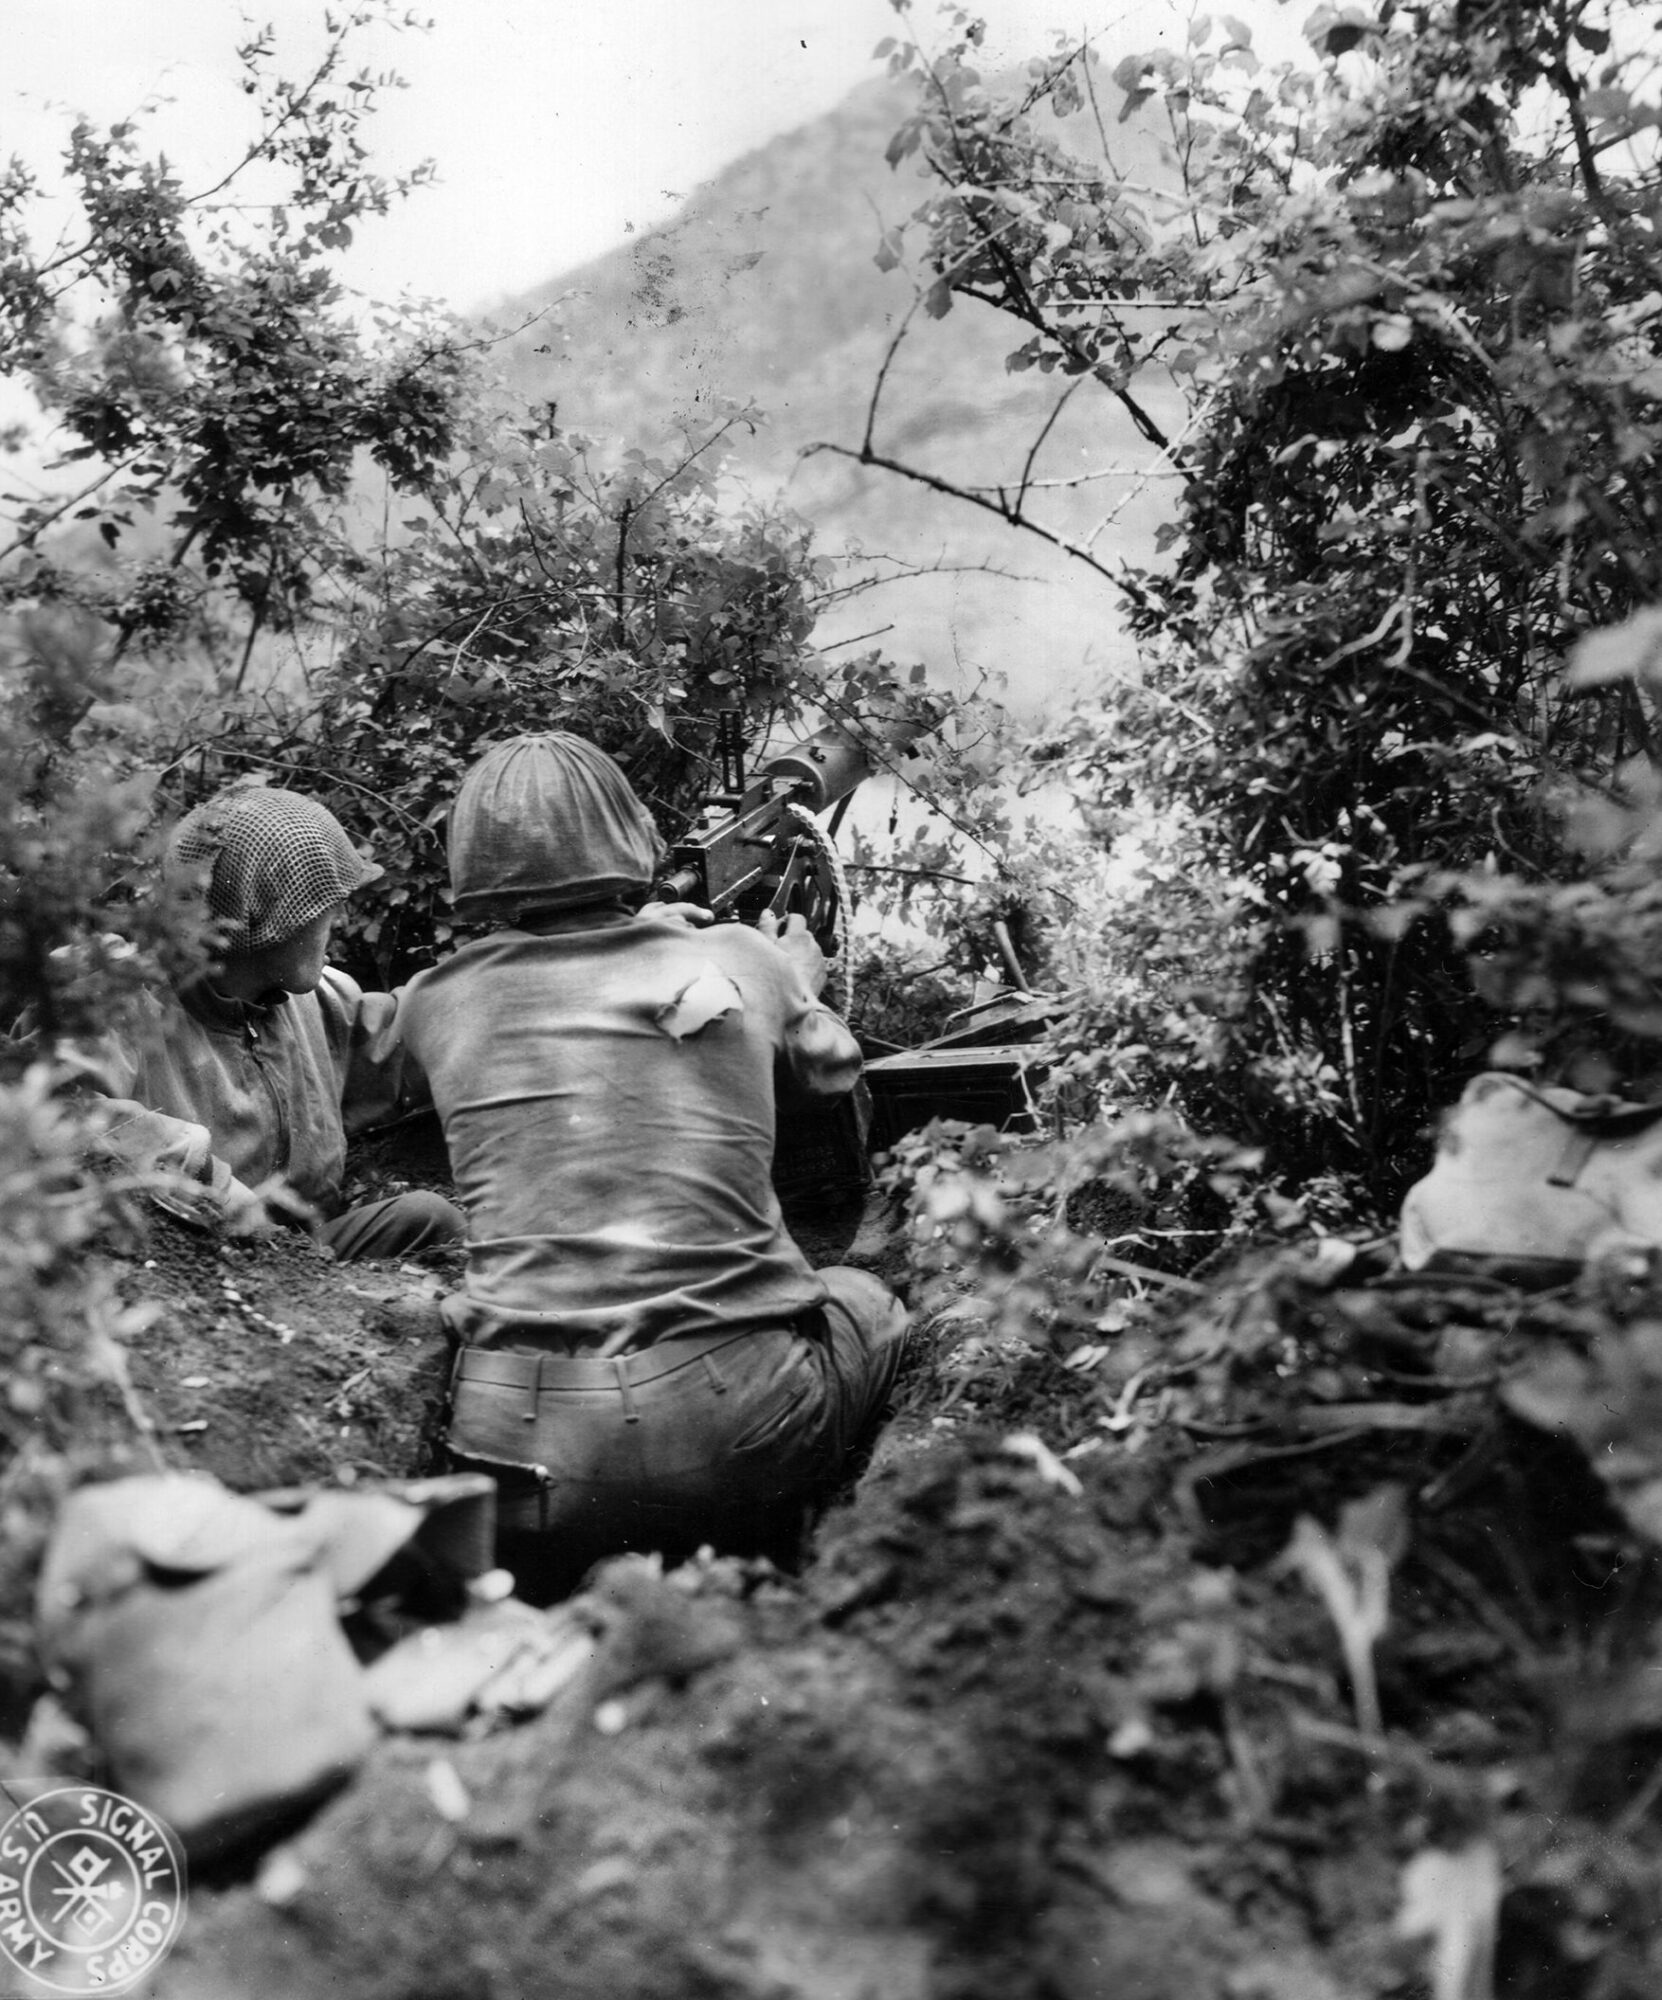 During the Anzio breakout in May 1944, a 3rd Division machine-gun crew fires on enemy positions near Cisterna, Italy. During the Italian campaign, 16 3rd Division men earned the Medal of Honor, nine of them posthumously.